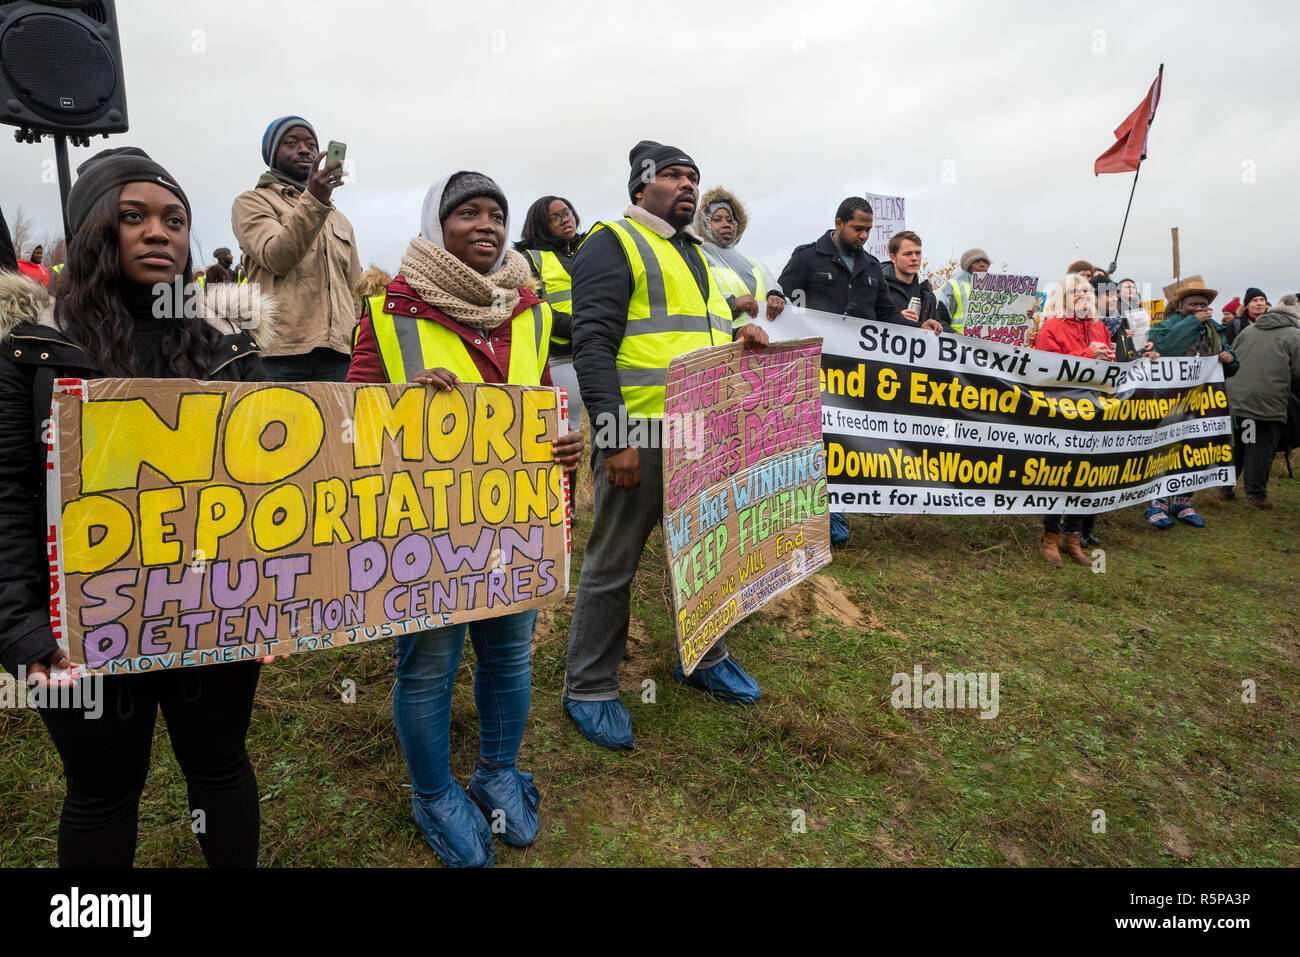 Milton Ernest, Bedford, UK. 1st December 2018. Yarls Wood Immigration Removal Centre ÔSuround Yarls Wood - Shut Down Yarls Wood and all Detention CentresÕ demonstration. Hundreds braved the poor weather to join the protest at the remotely situated Yarls Wood IRC. Incarcerated women waved desperately at windows and their mobile phone conversations were relayed via the PA system outside the security fence. Speakers included those who had previously been imprisoned in Yarls Wood. This was the 15th Yarls Wood demonstration organised by Movement for Justice. Credit: Steve Bell/Alamy Live News Stock Photo